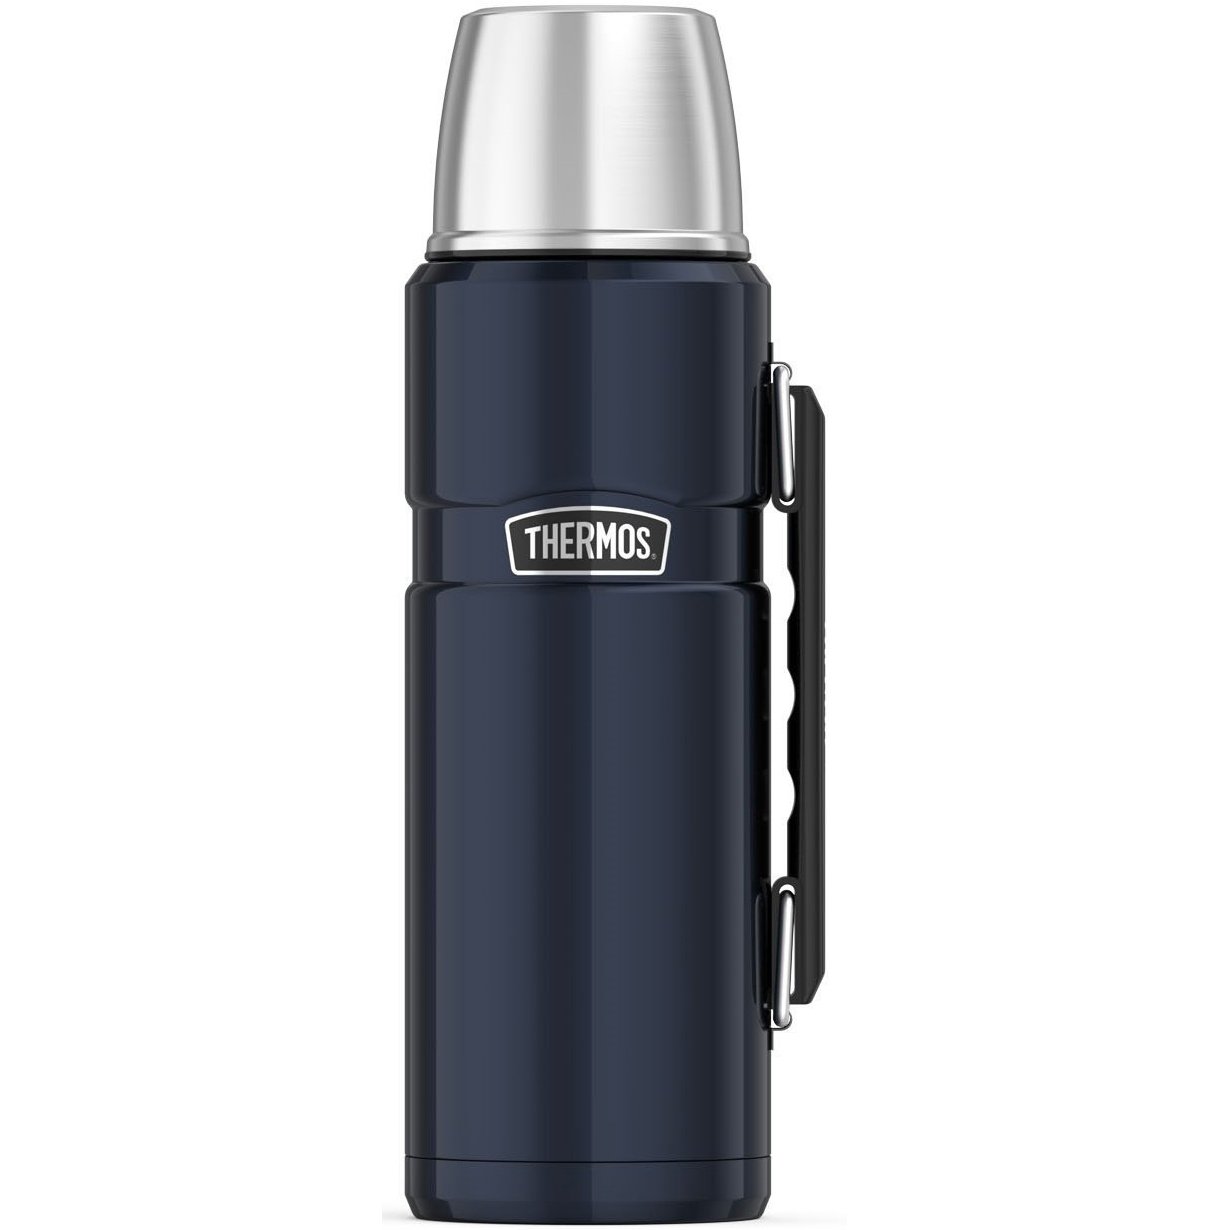 Thermos Stainless King 40 Ounce Beverage Bottle, Midnight Blue